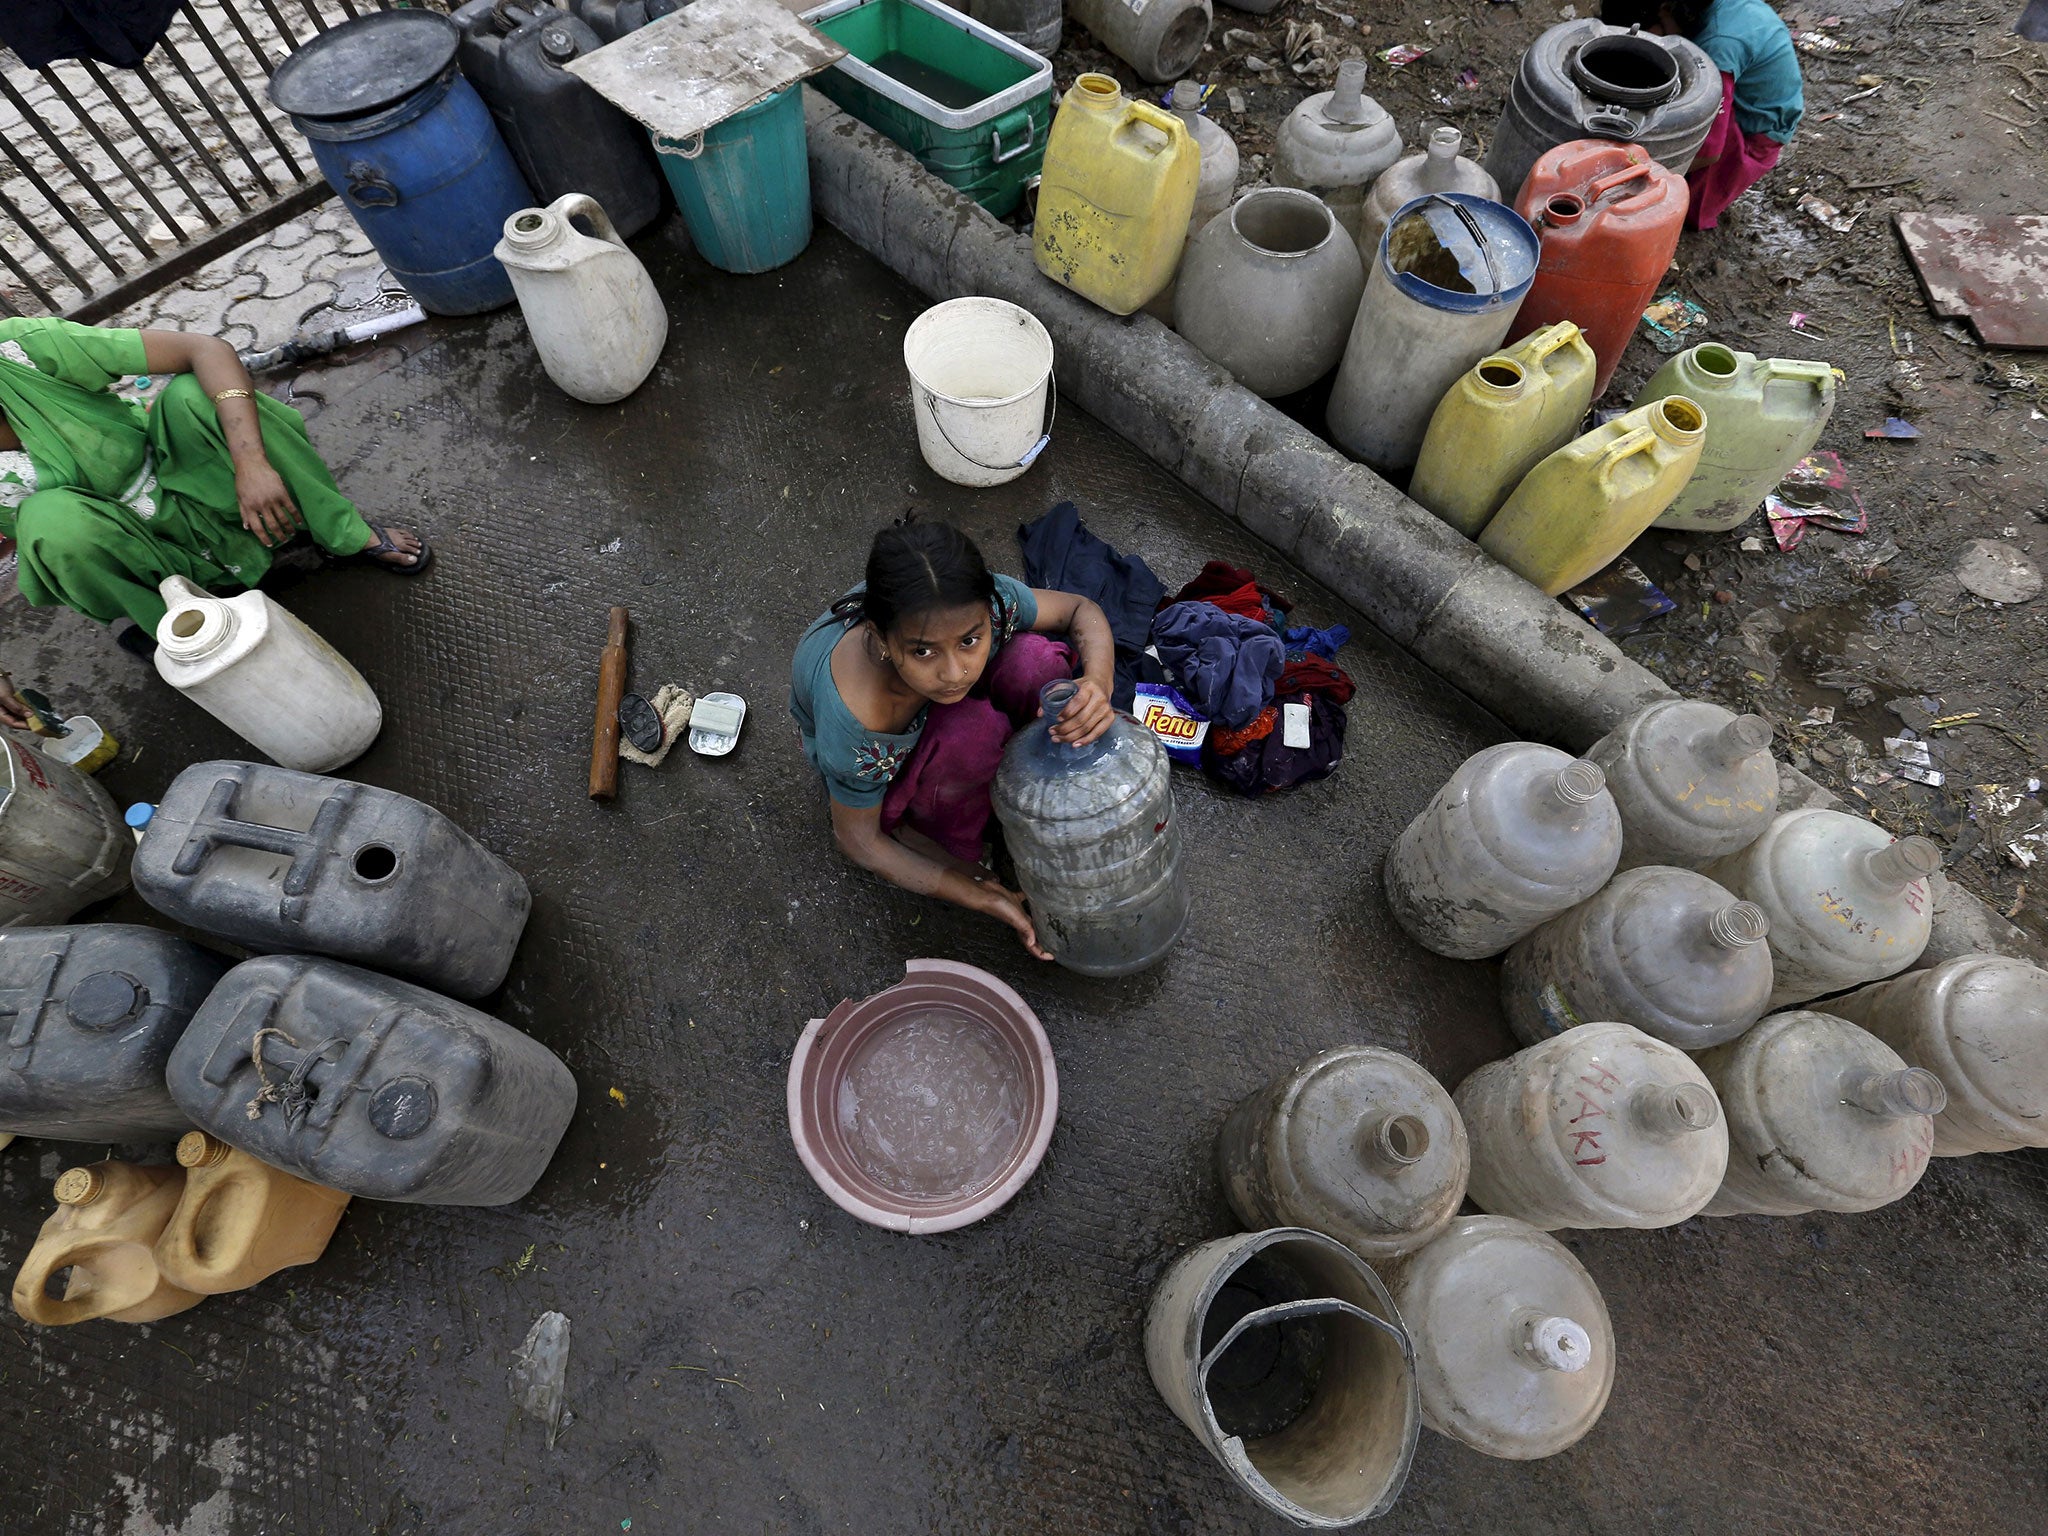 A girl waiting to fill water containers from a municipal tap in Delhi, where the protests have created a shortage